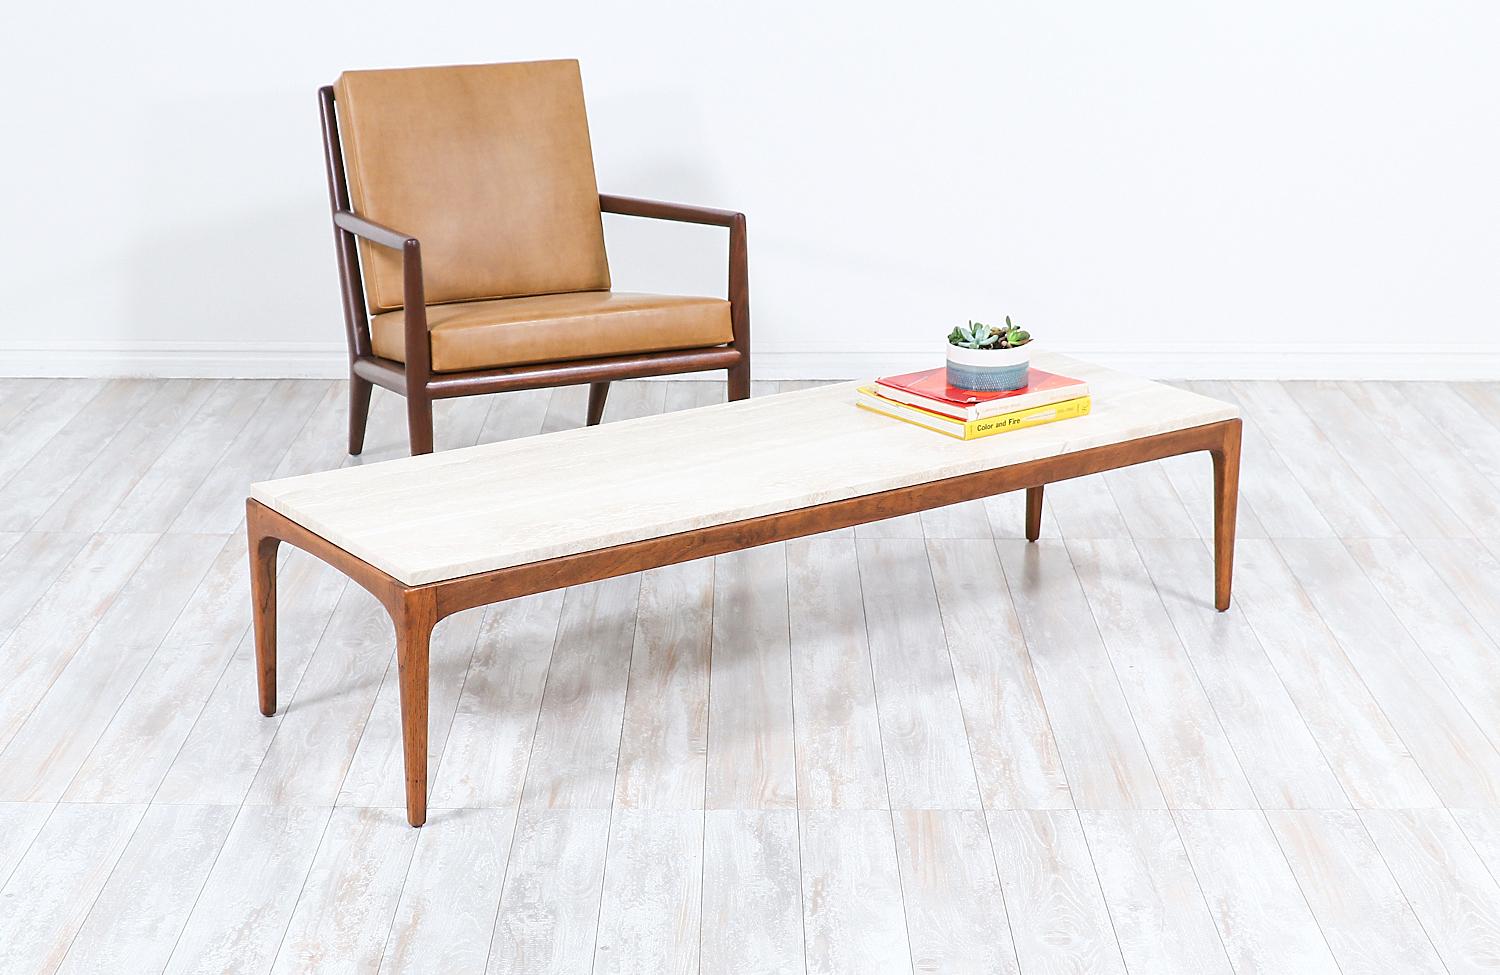 Mid-Century Modern “Rythm” coffee table with Crema Marfil marble top by Lane.